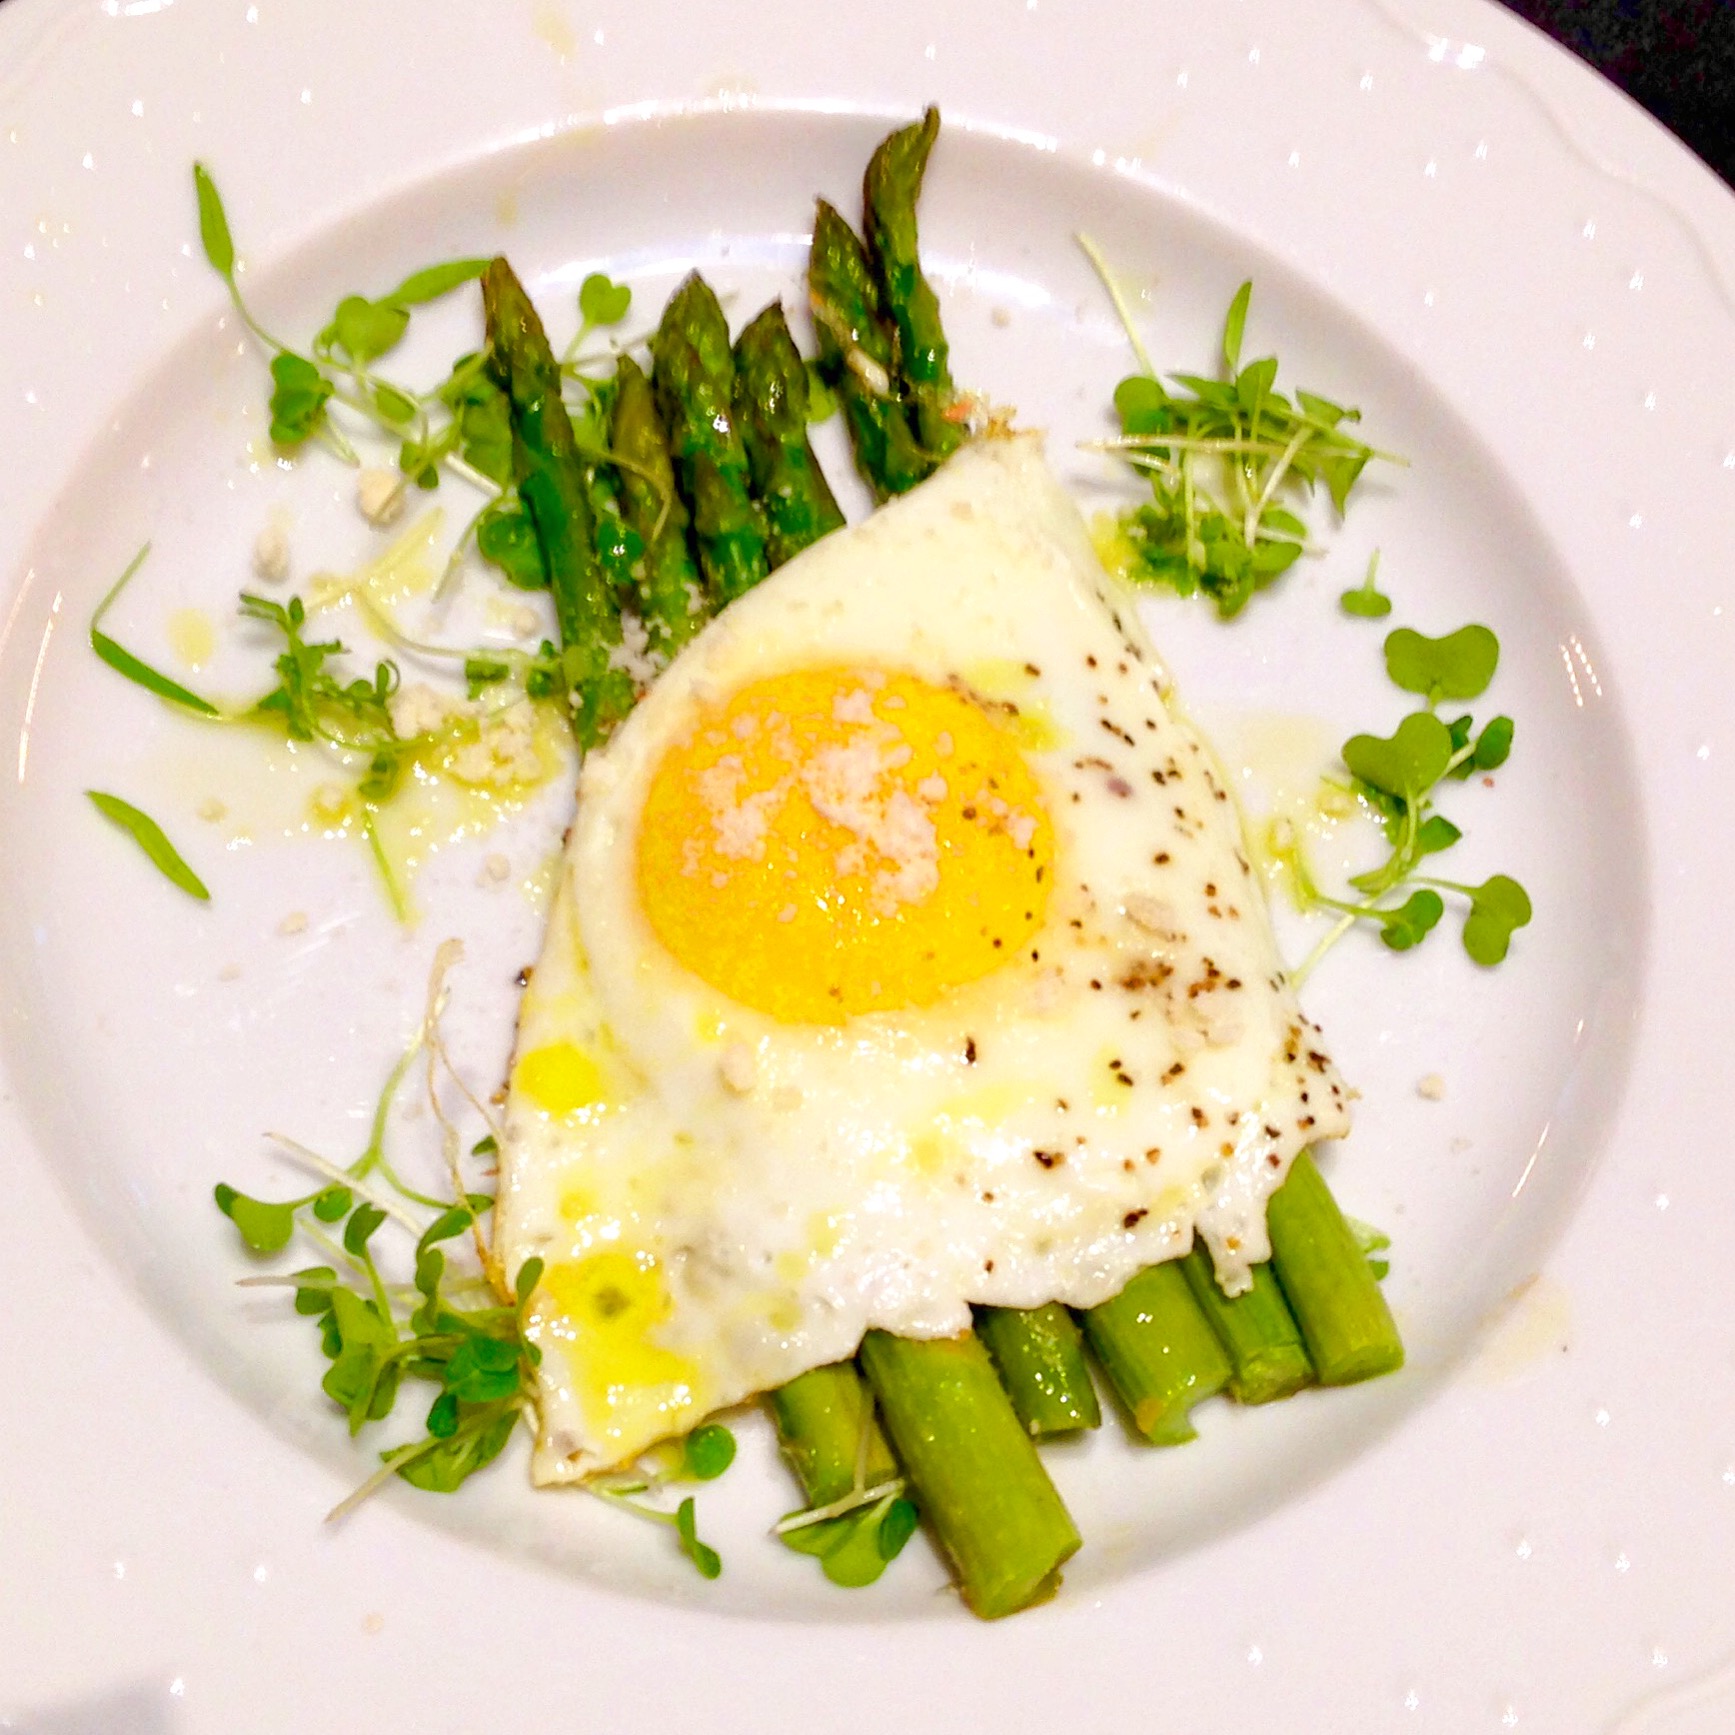 Olive oil-cooked egg on asparagus spears with microgreens, parmigiano, and truffle butter